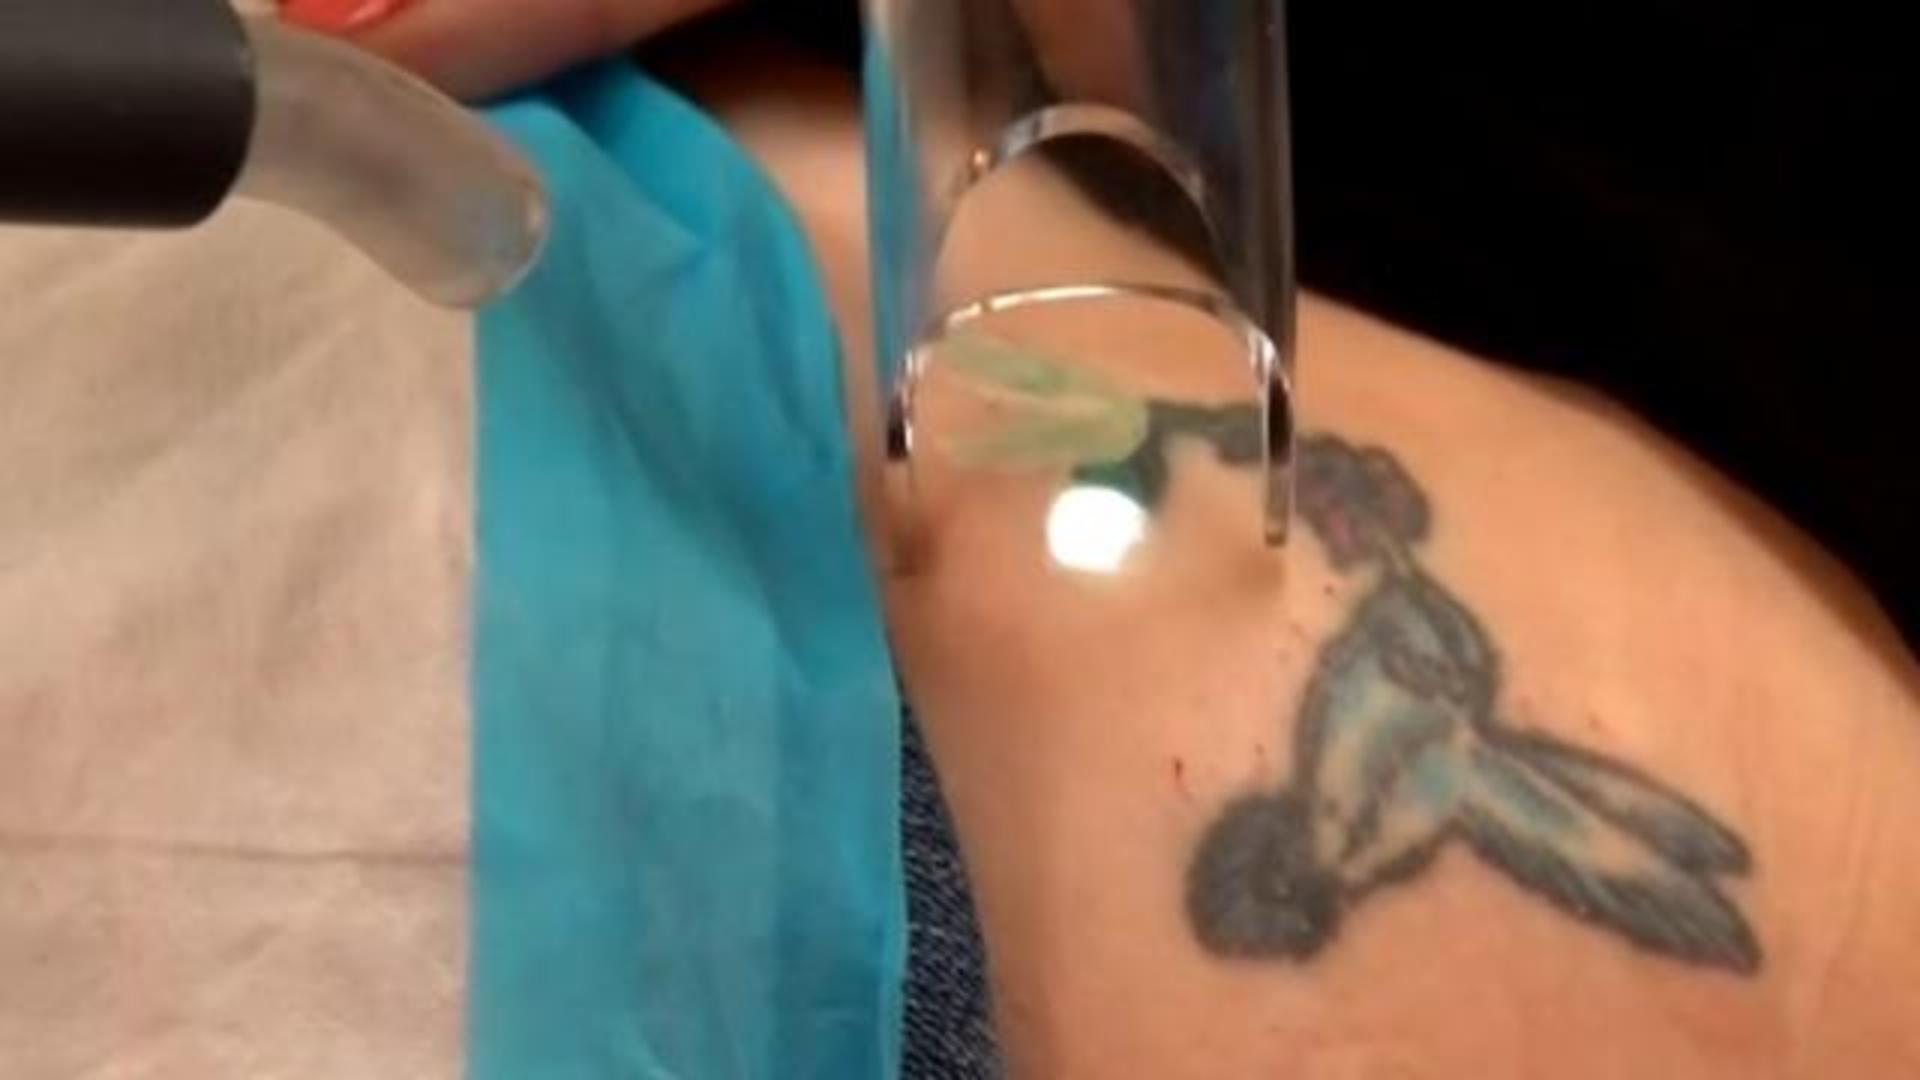 Tattoo removal using a multilayer Q-switched laser | PRIME Journal